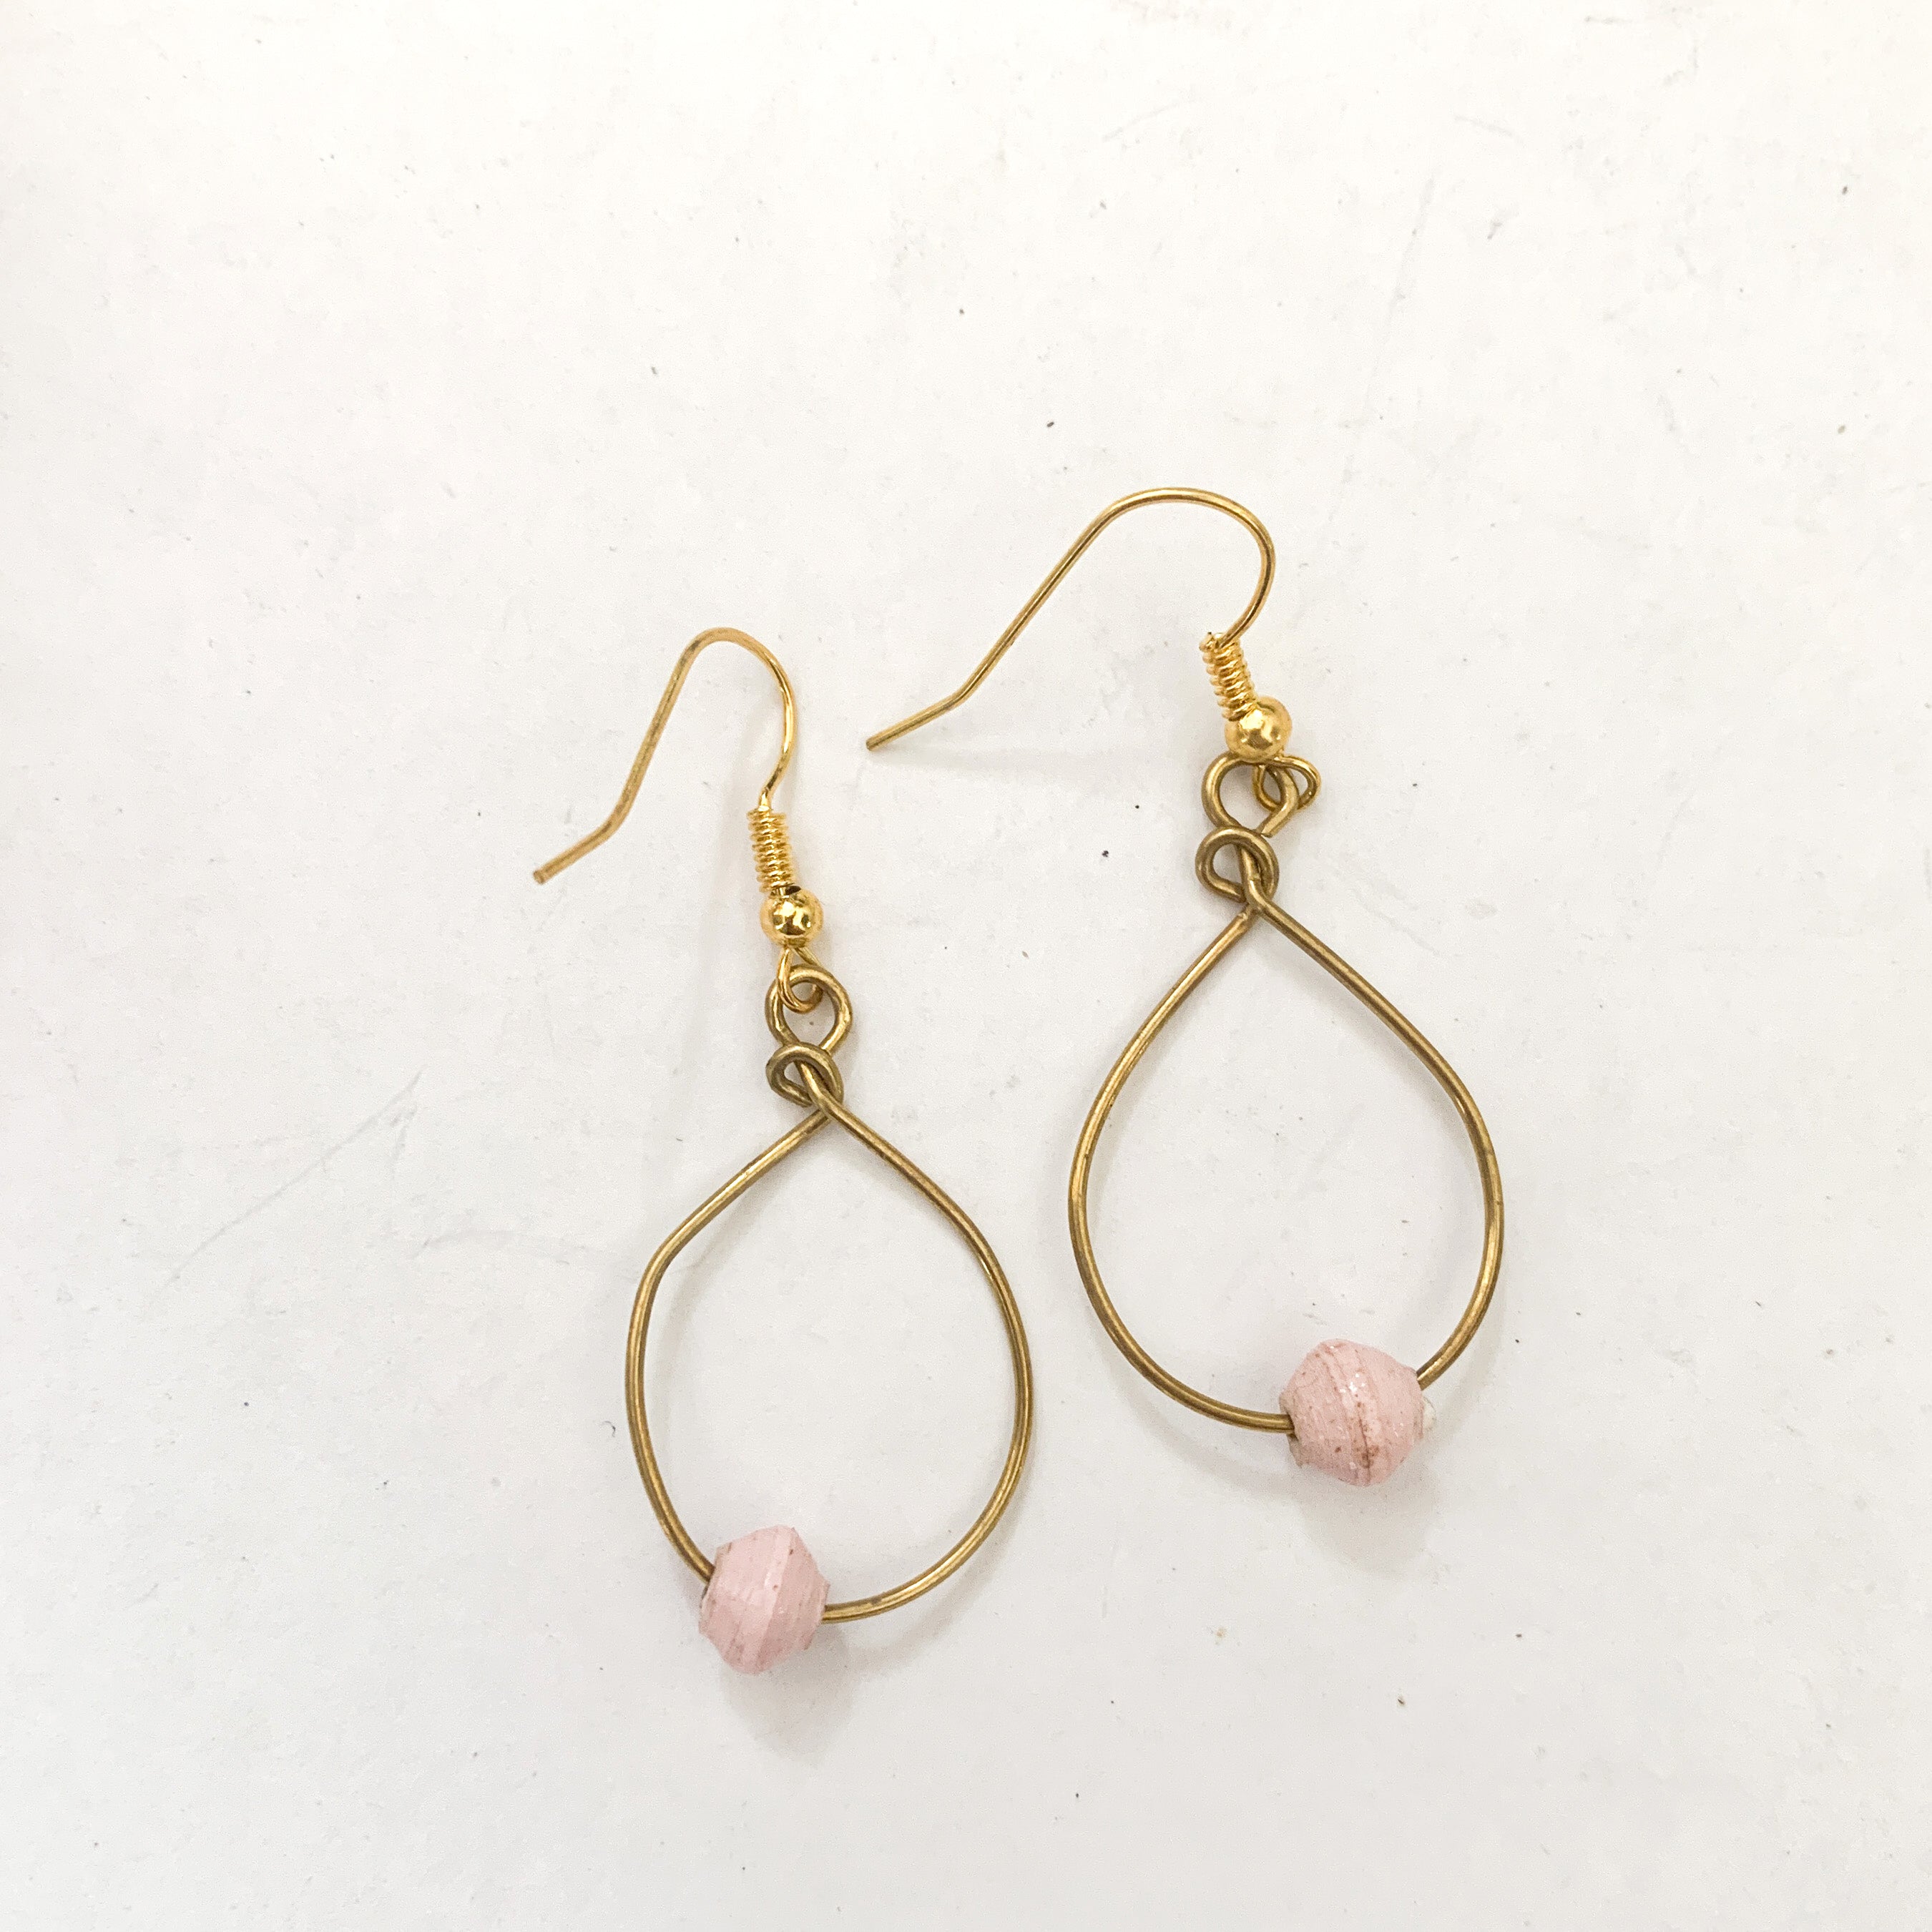 Small Twere Earrings - various colours/brass wire